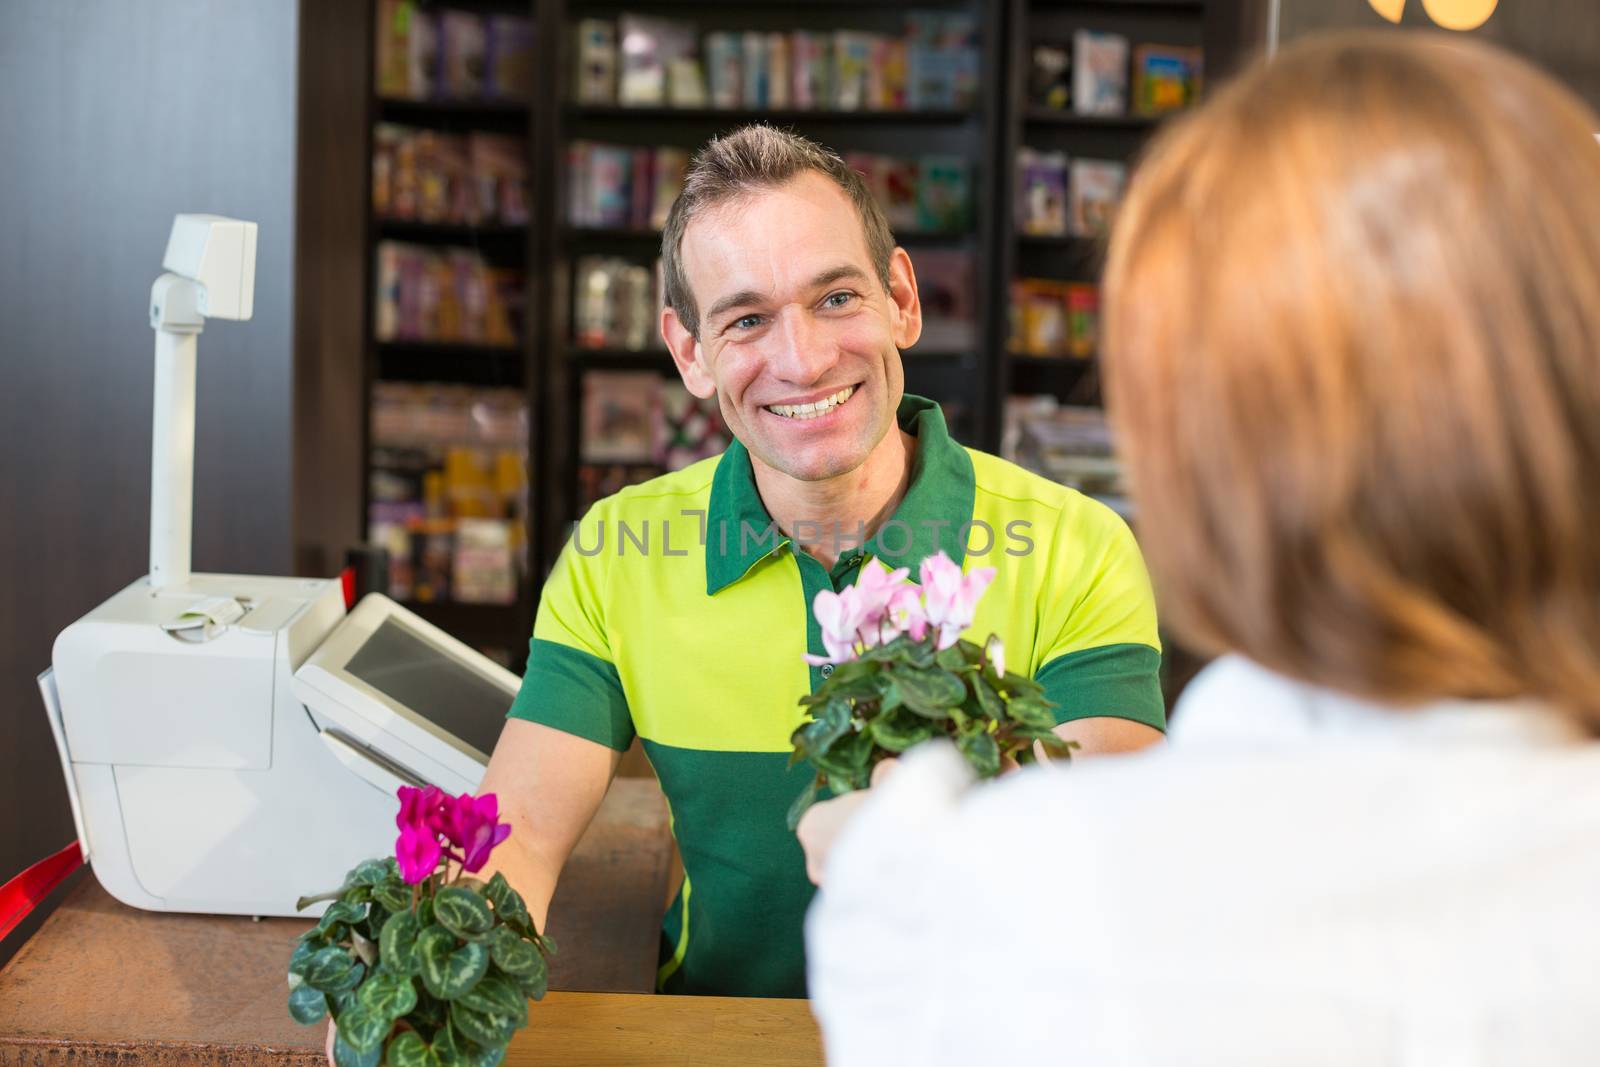 Cashier or shopkeeper in flower shop or retail store serving a customer